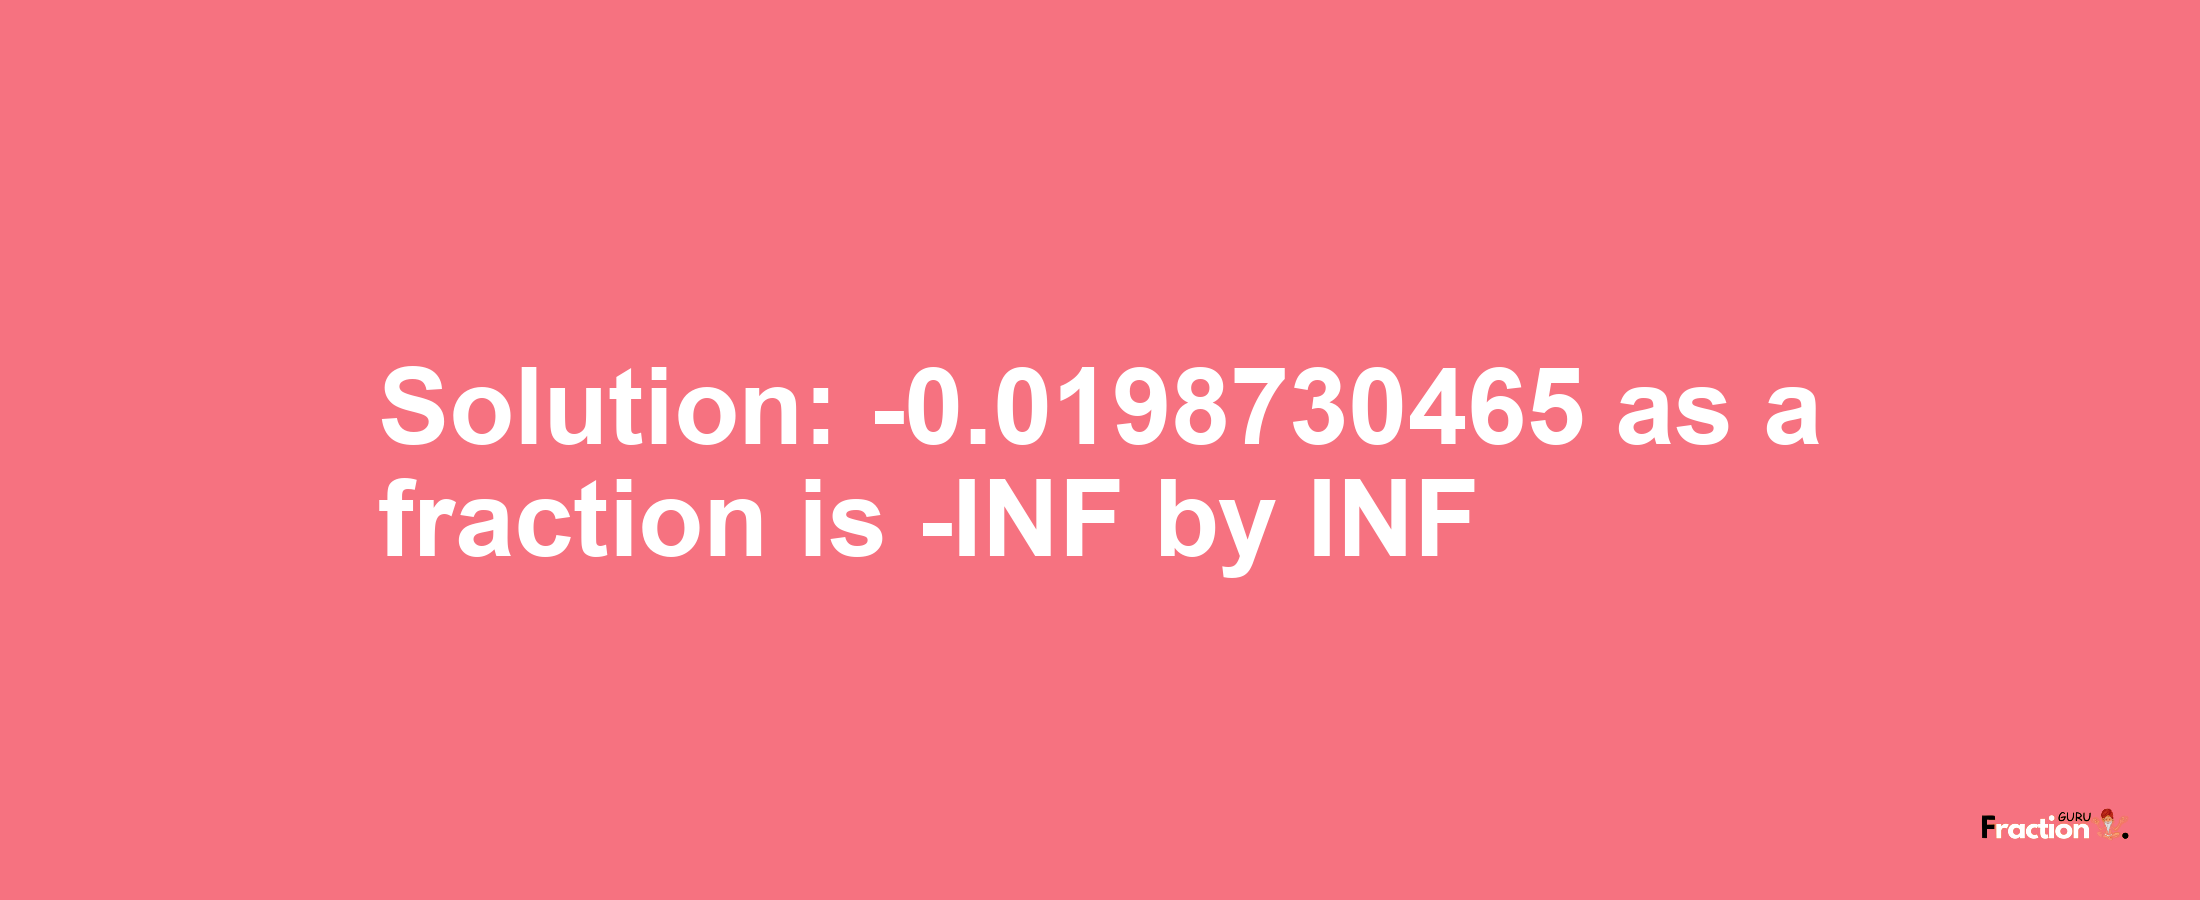 Solution:-0.0198730465 as a fraction is -INF/INF